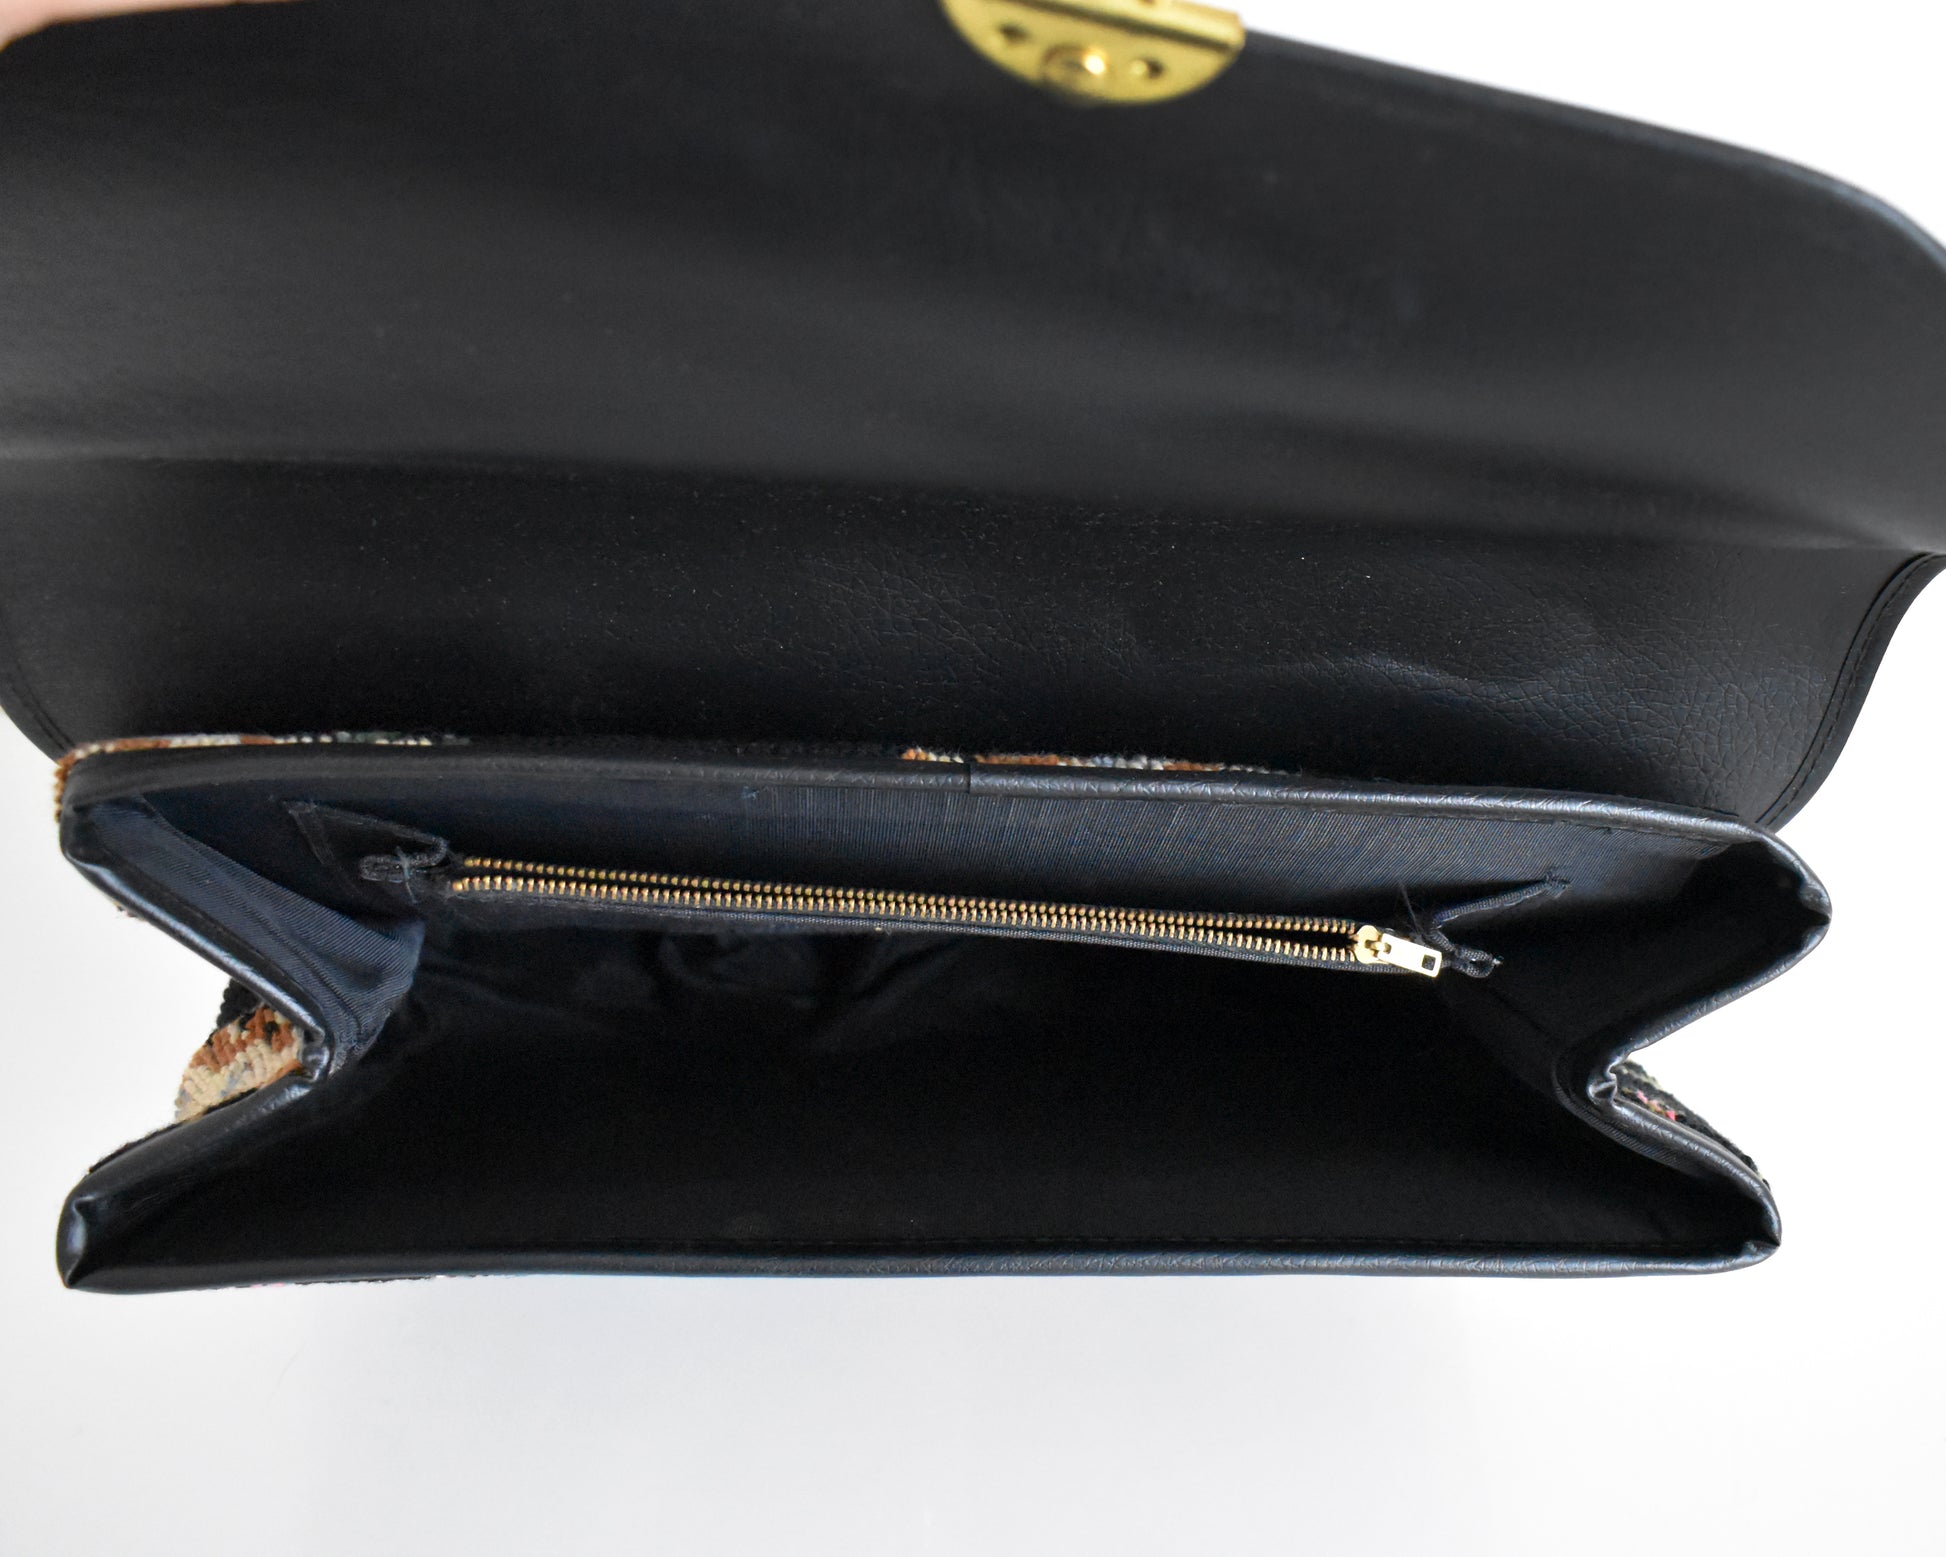 inside shot of the purse which shows the black lining and zippered pocket